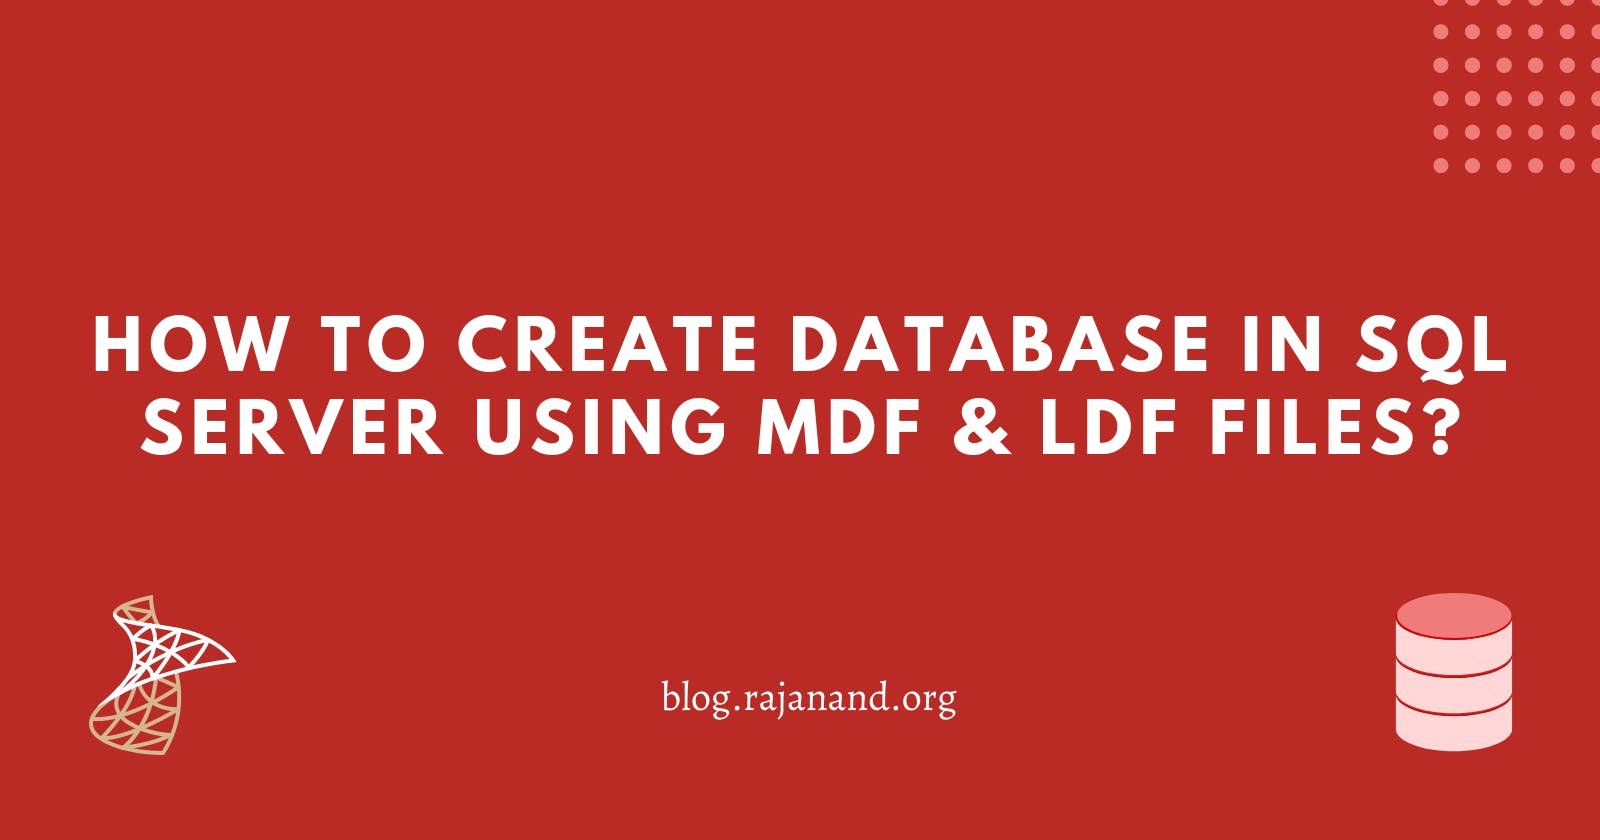 How to attach database files and create database in SQL Server?